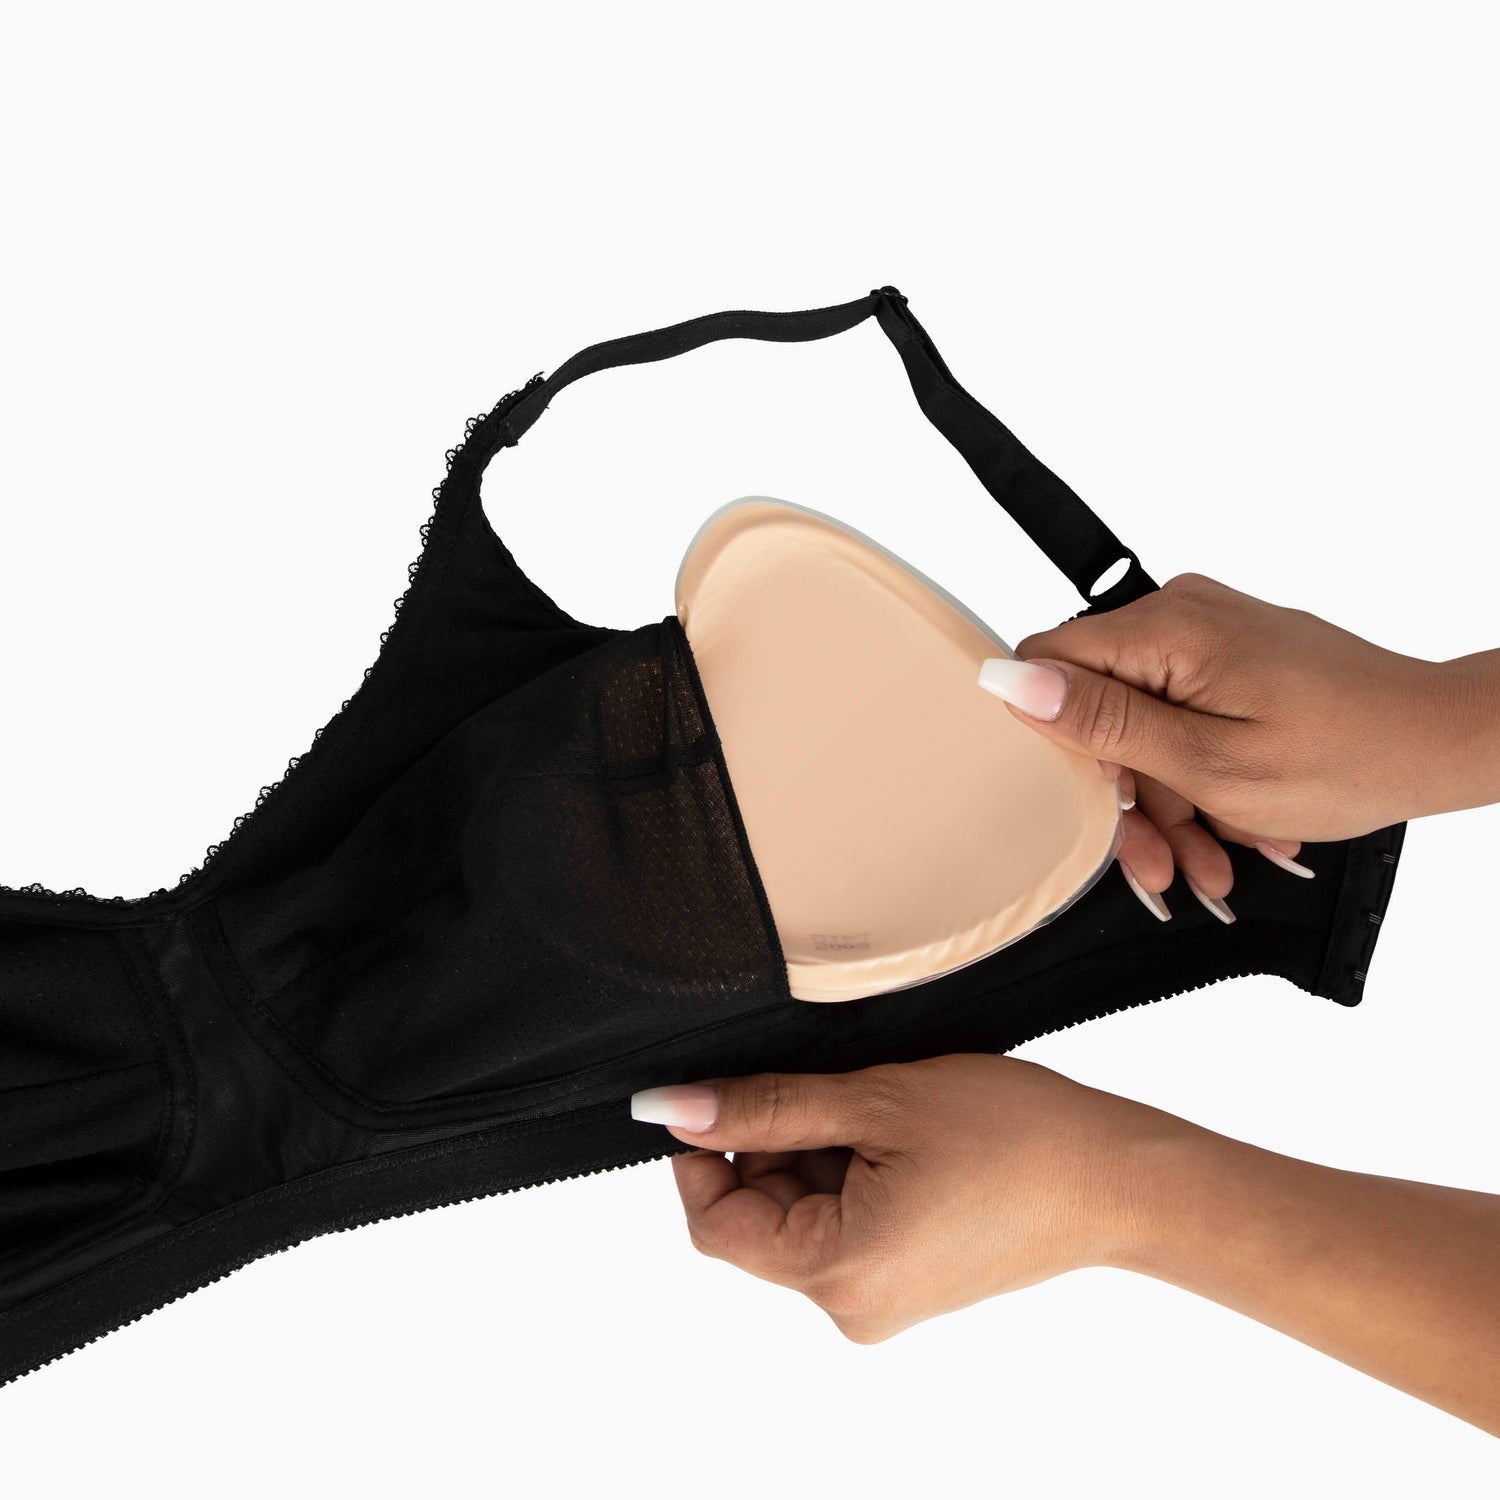 How to Properly Care for your Breast Prosthesis